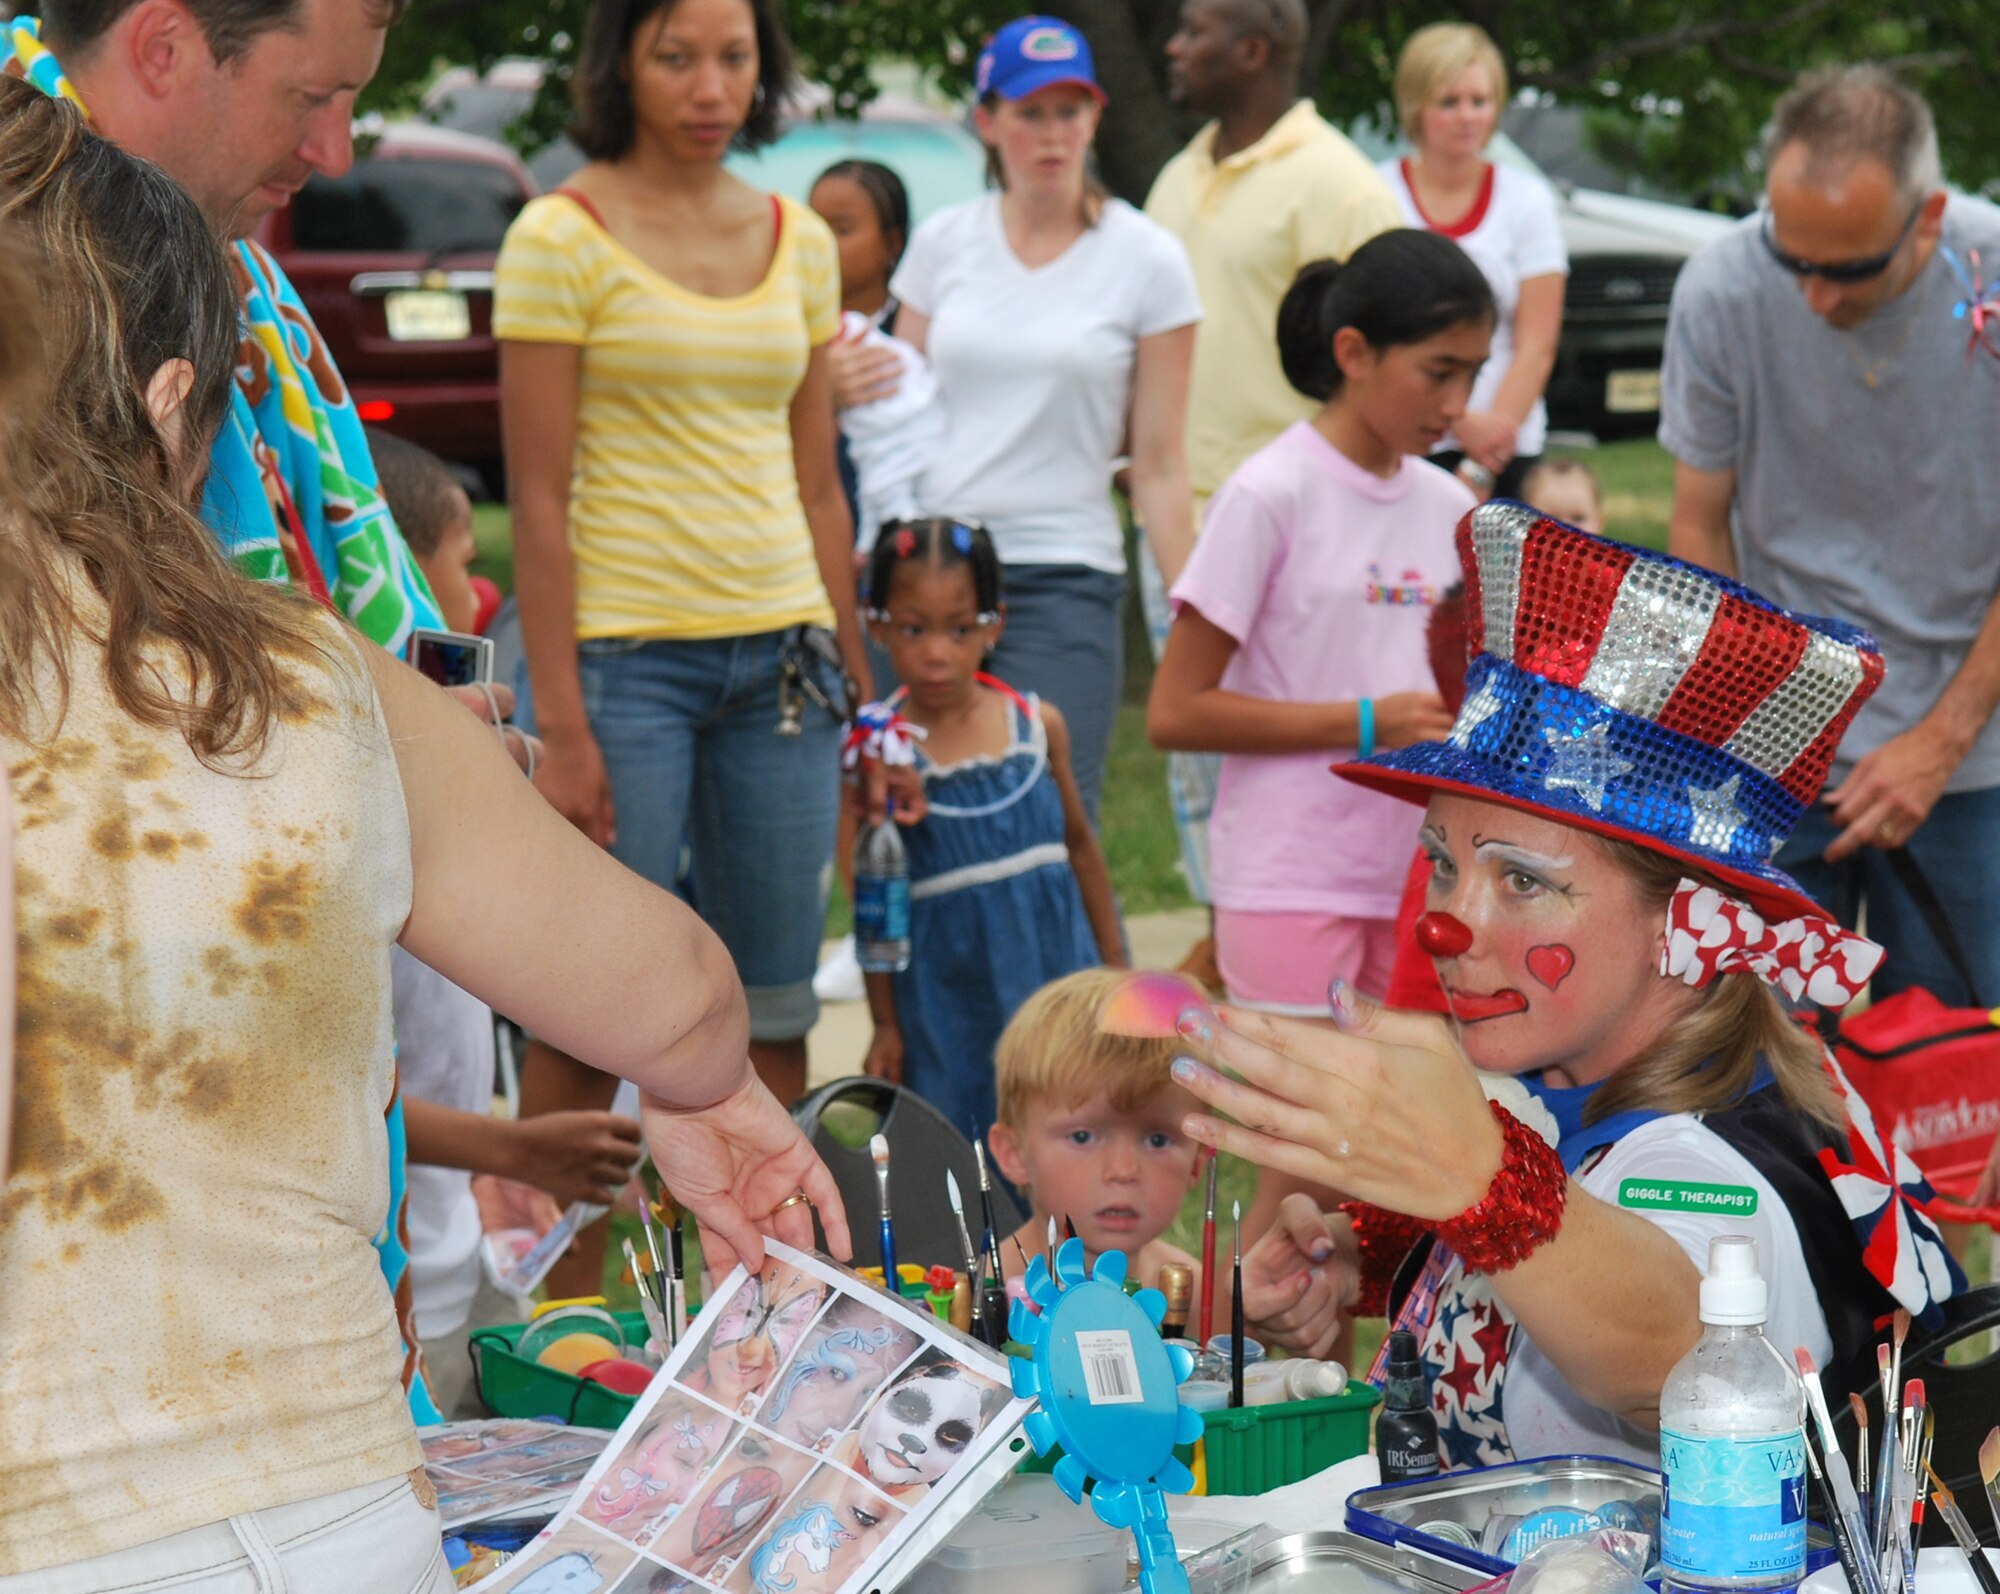 Sweet Pickles interacts with the Bolling community July 4 during the 6th Annual Freedom Fest at Bolling Green Park. (U.S. Air Force photo by Senior Airman Edward Carr)